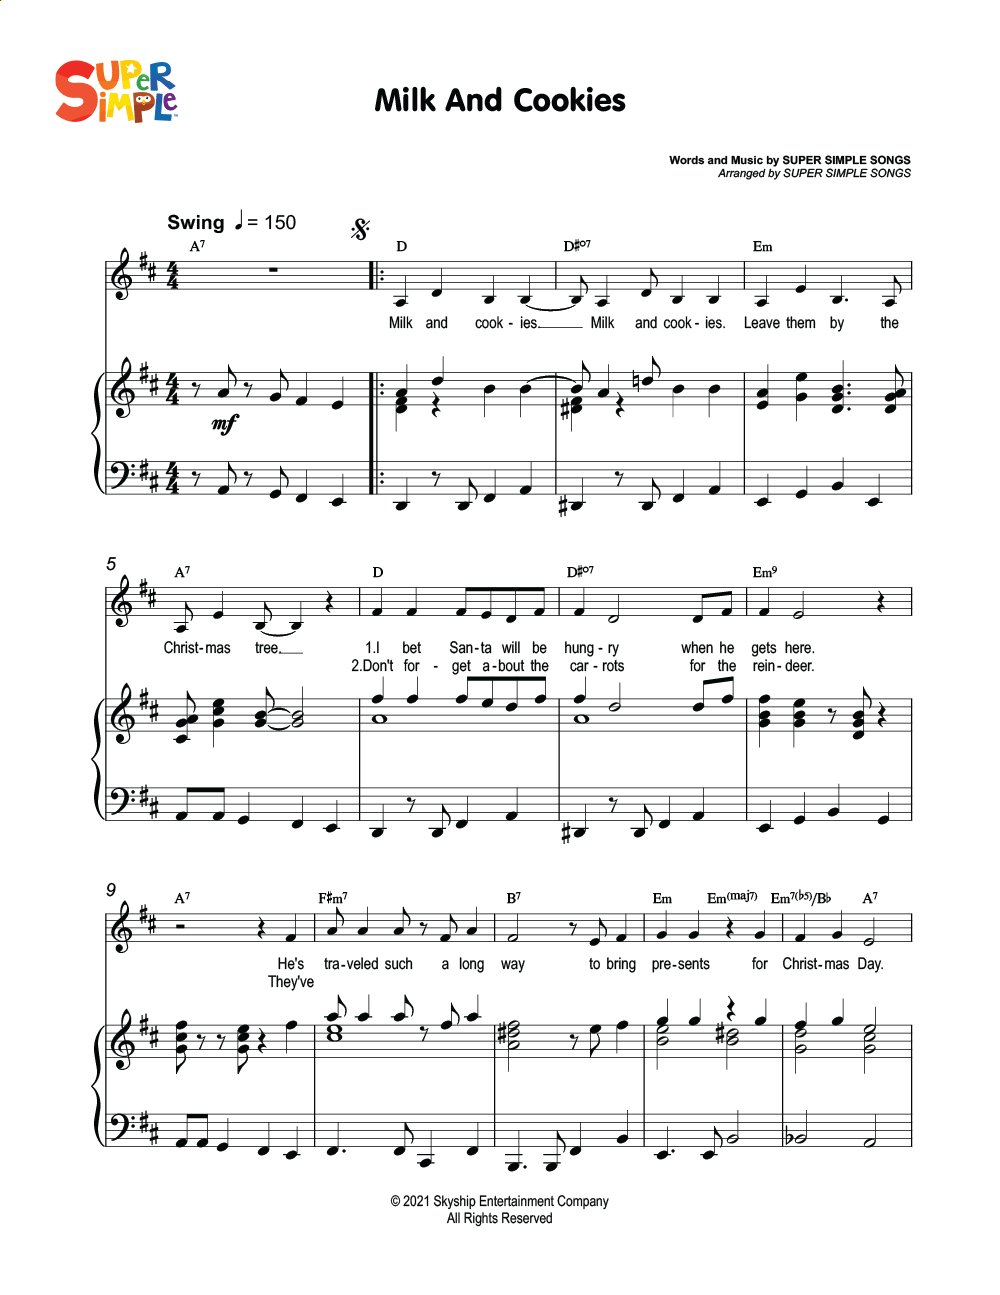 https://supersimple.com/wp-content/uploads/2022/10/milk-and-cookies-sheet-music-d-orig.png